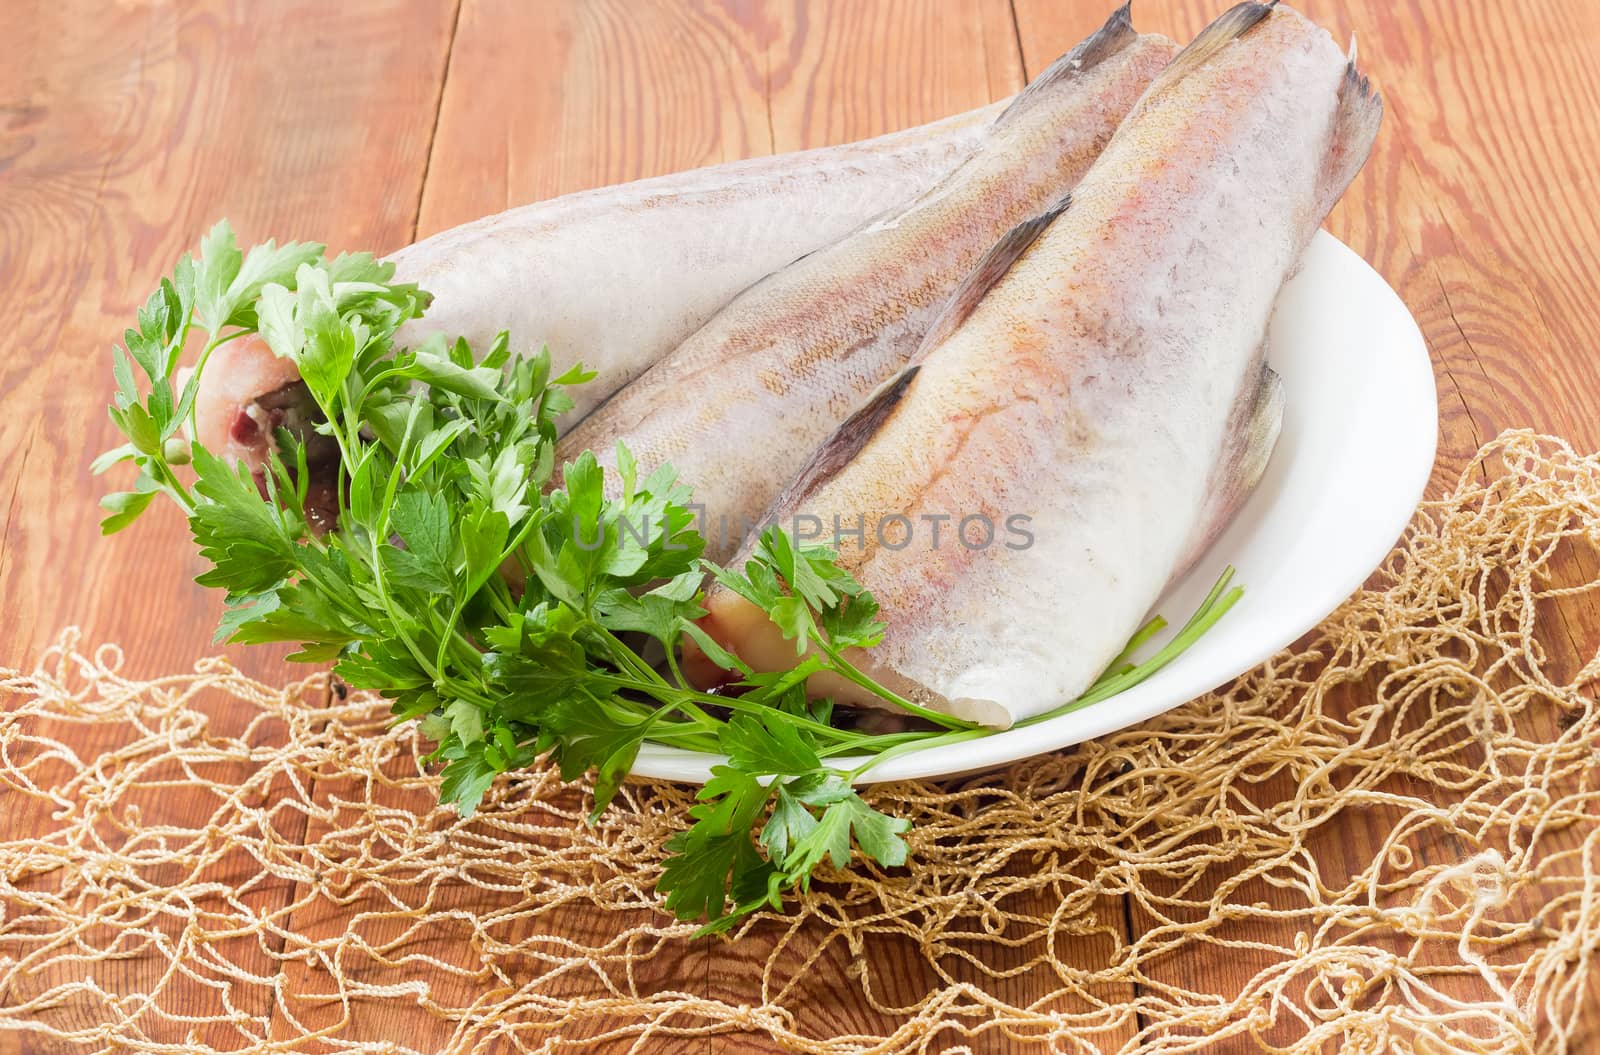 Three uncooked carcasses of the Alaska pollock without of head and tail and bundle of parsley on a white dish on a surface of old wooden planks with fishing net in foreground
